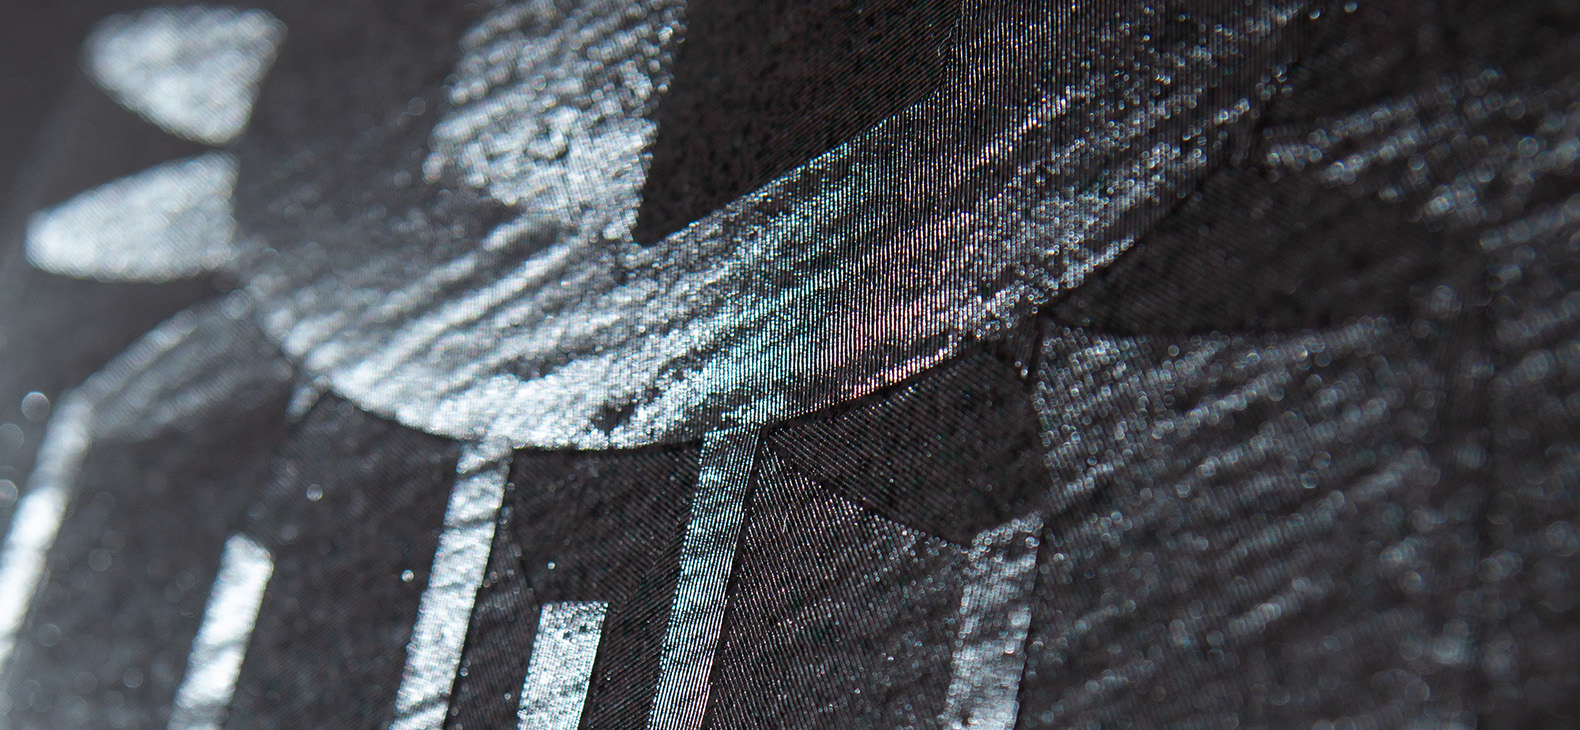 Detail from photograph of one of the works of the Hungarian artist Ádám Varga. You can see a detail shot of a black canvas into which patterns were deliberately milled. Under light irradiation a motive comes to light. Work 04-17 from the series "Engraved Canvases".